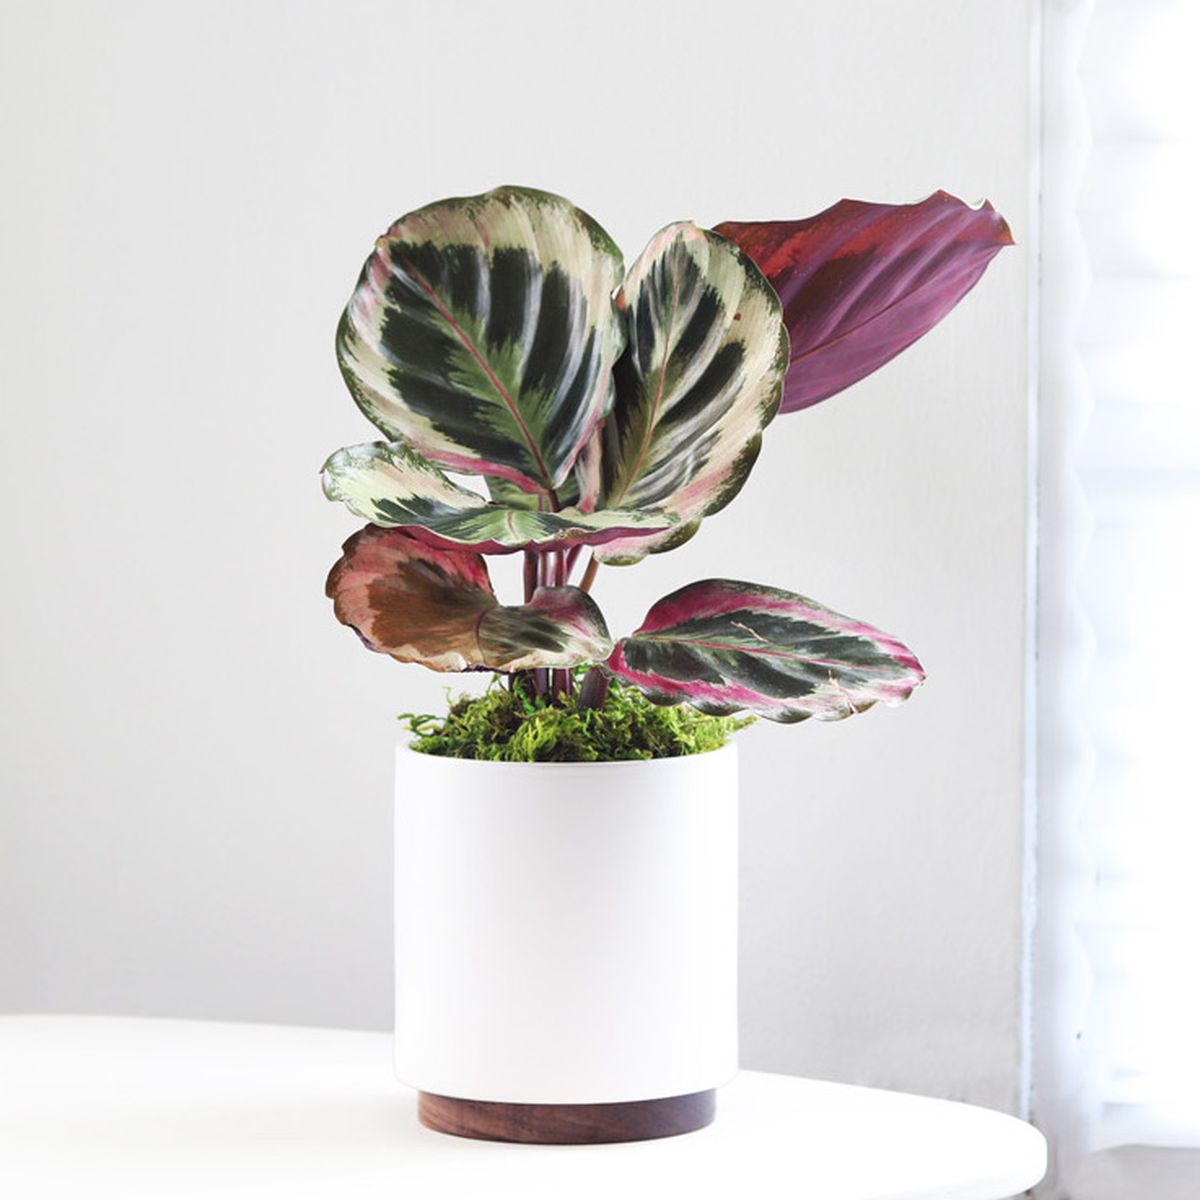 White round planter holds a purple and dark green plant with round leaves. 